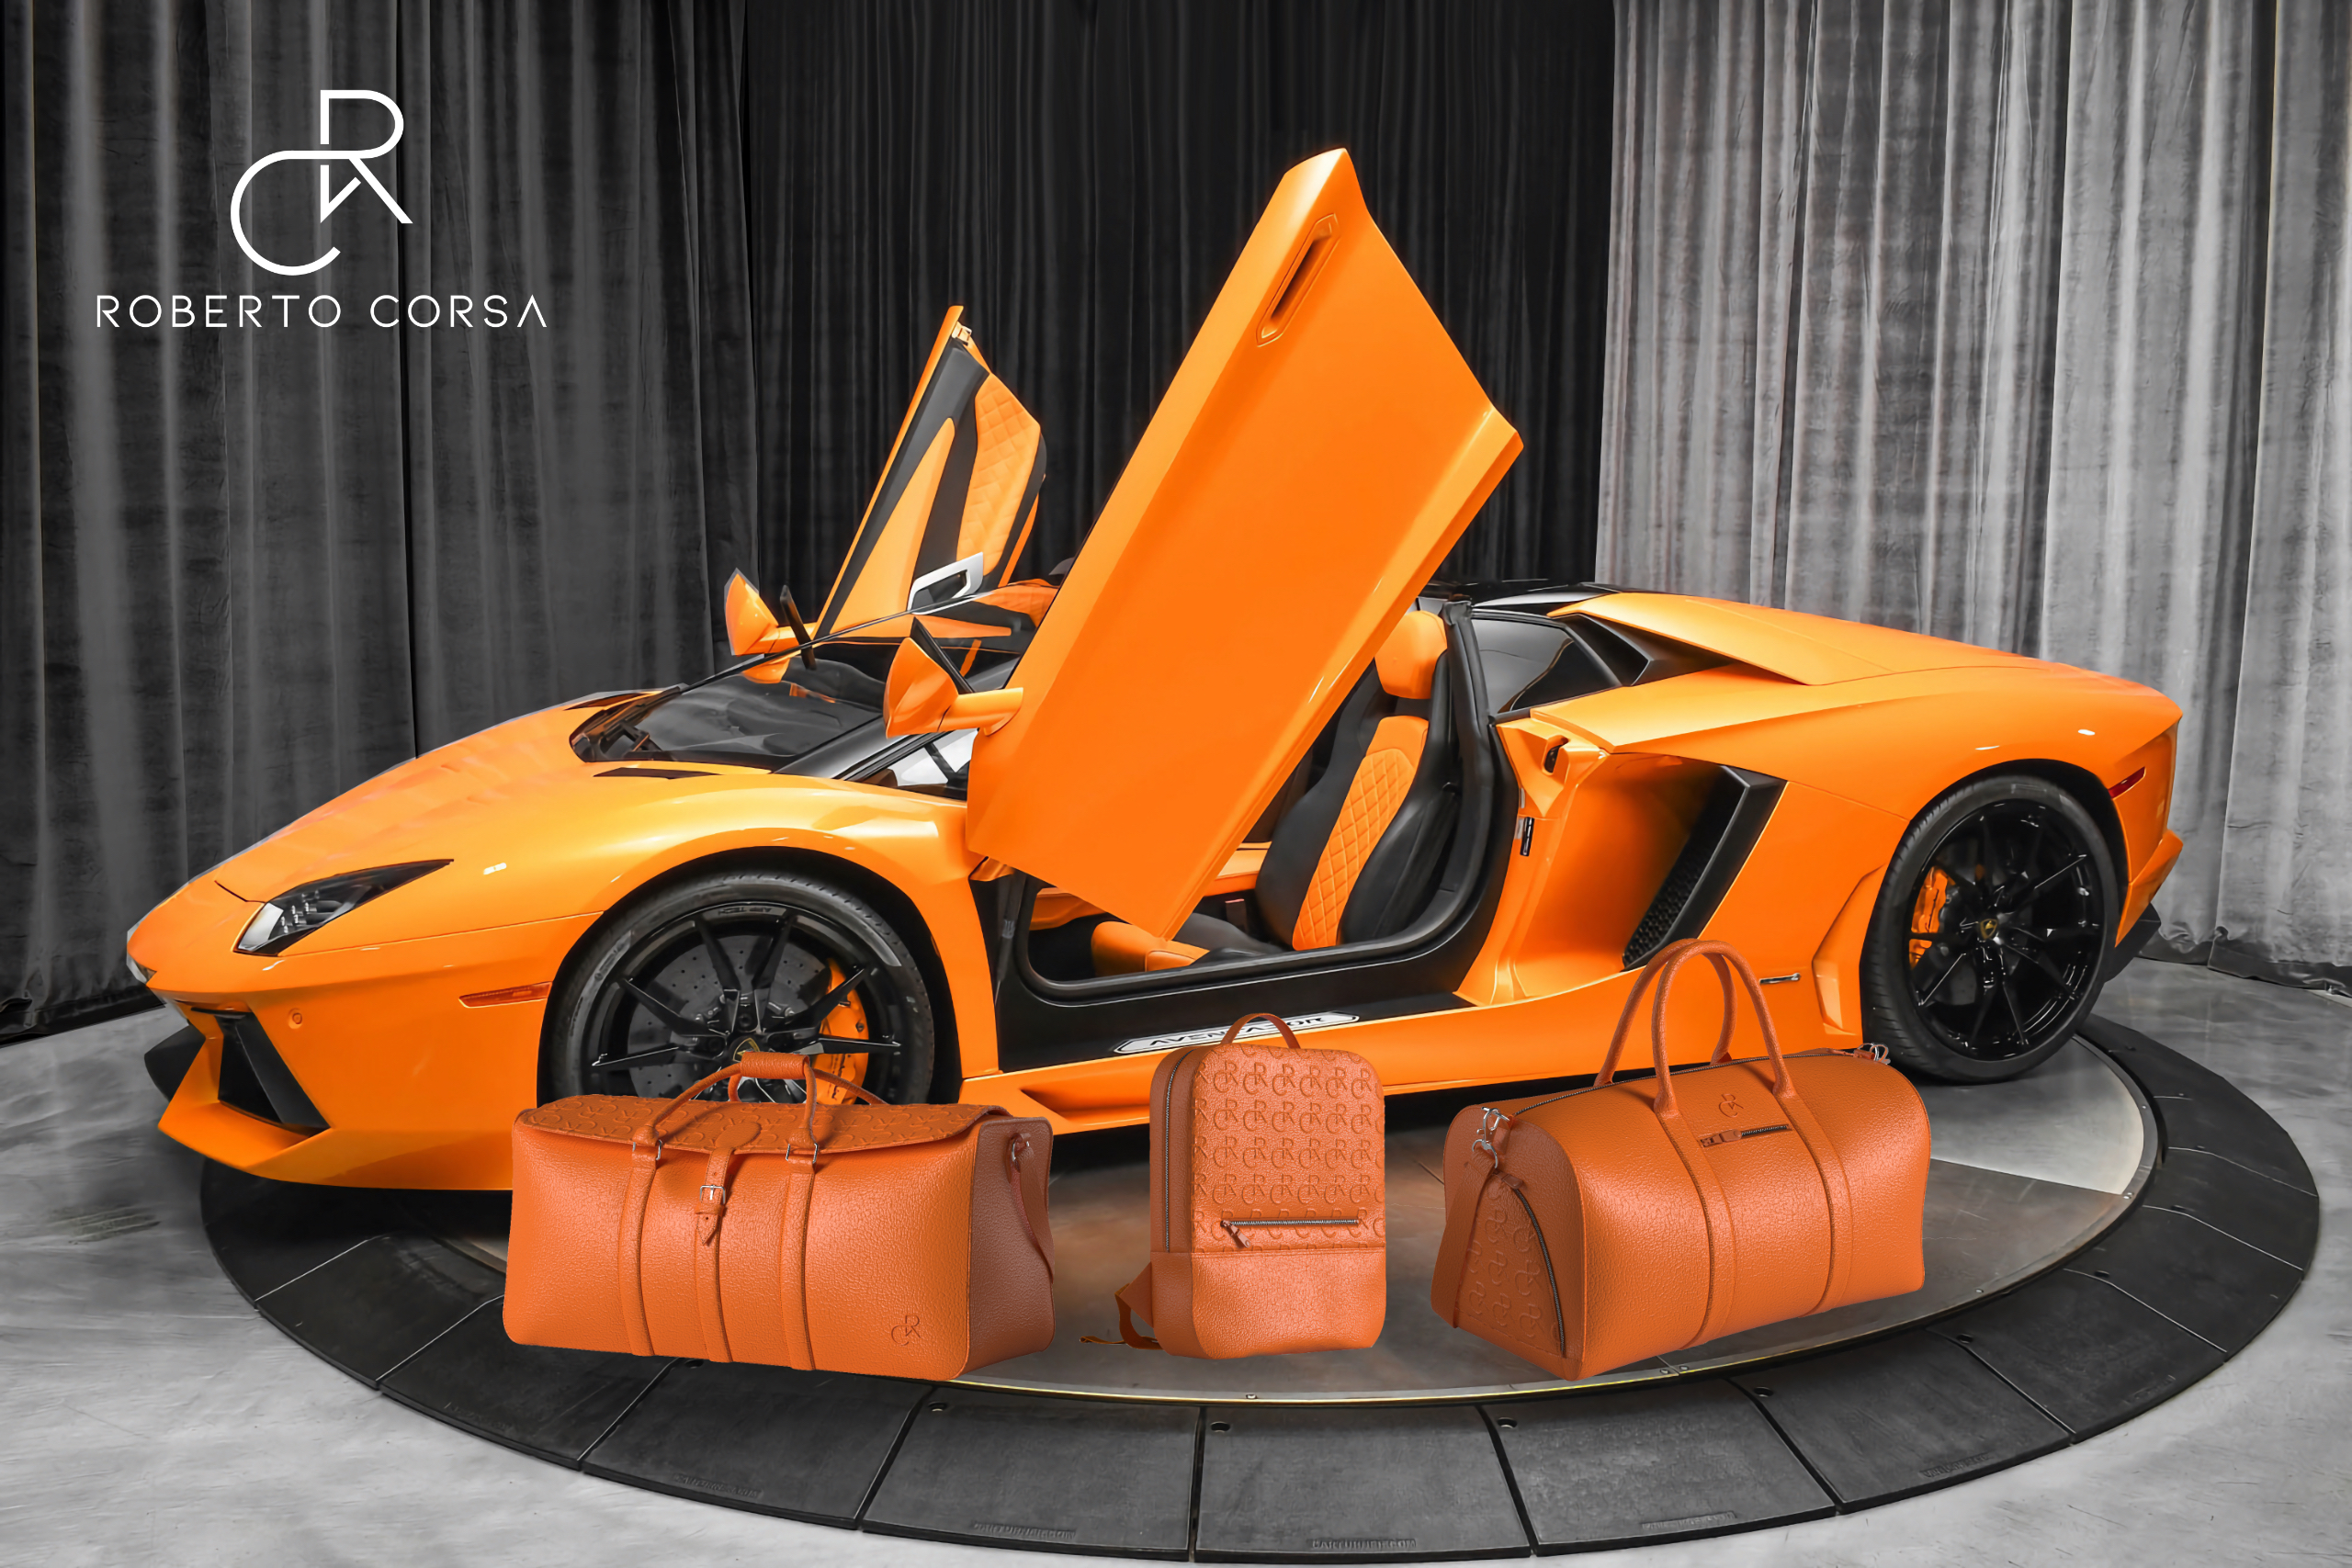 Lamborghini Aventador S Travel Bag Set: Duffle Bag, Back-Pack & Rolling  Carry-On Trolley Luggage: Fits into the OEM Roadster - DMC